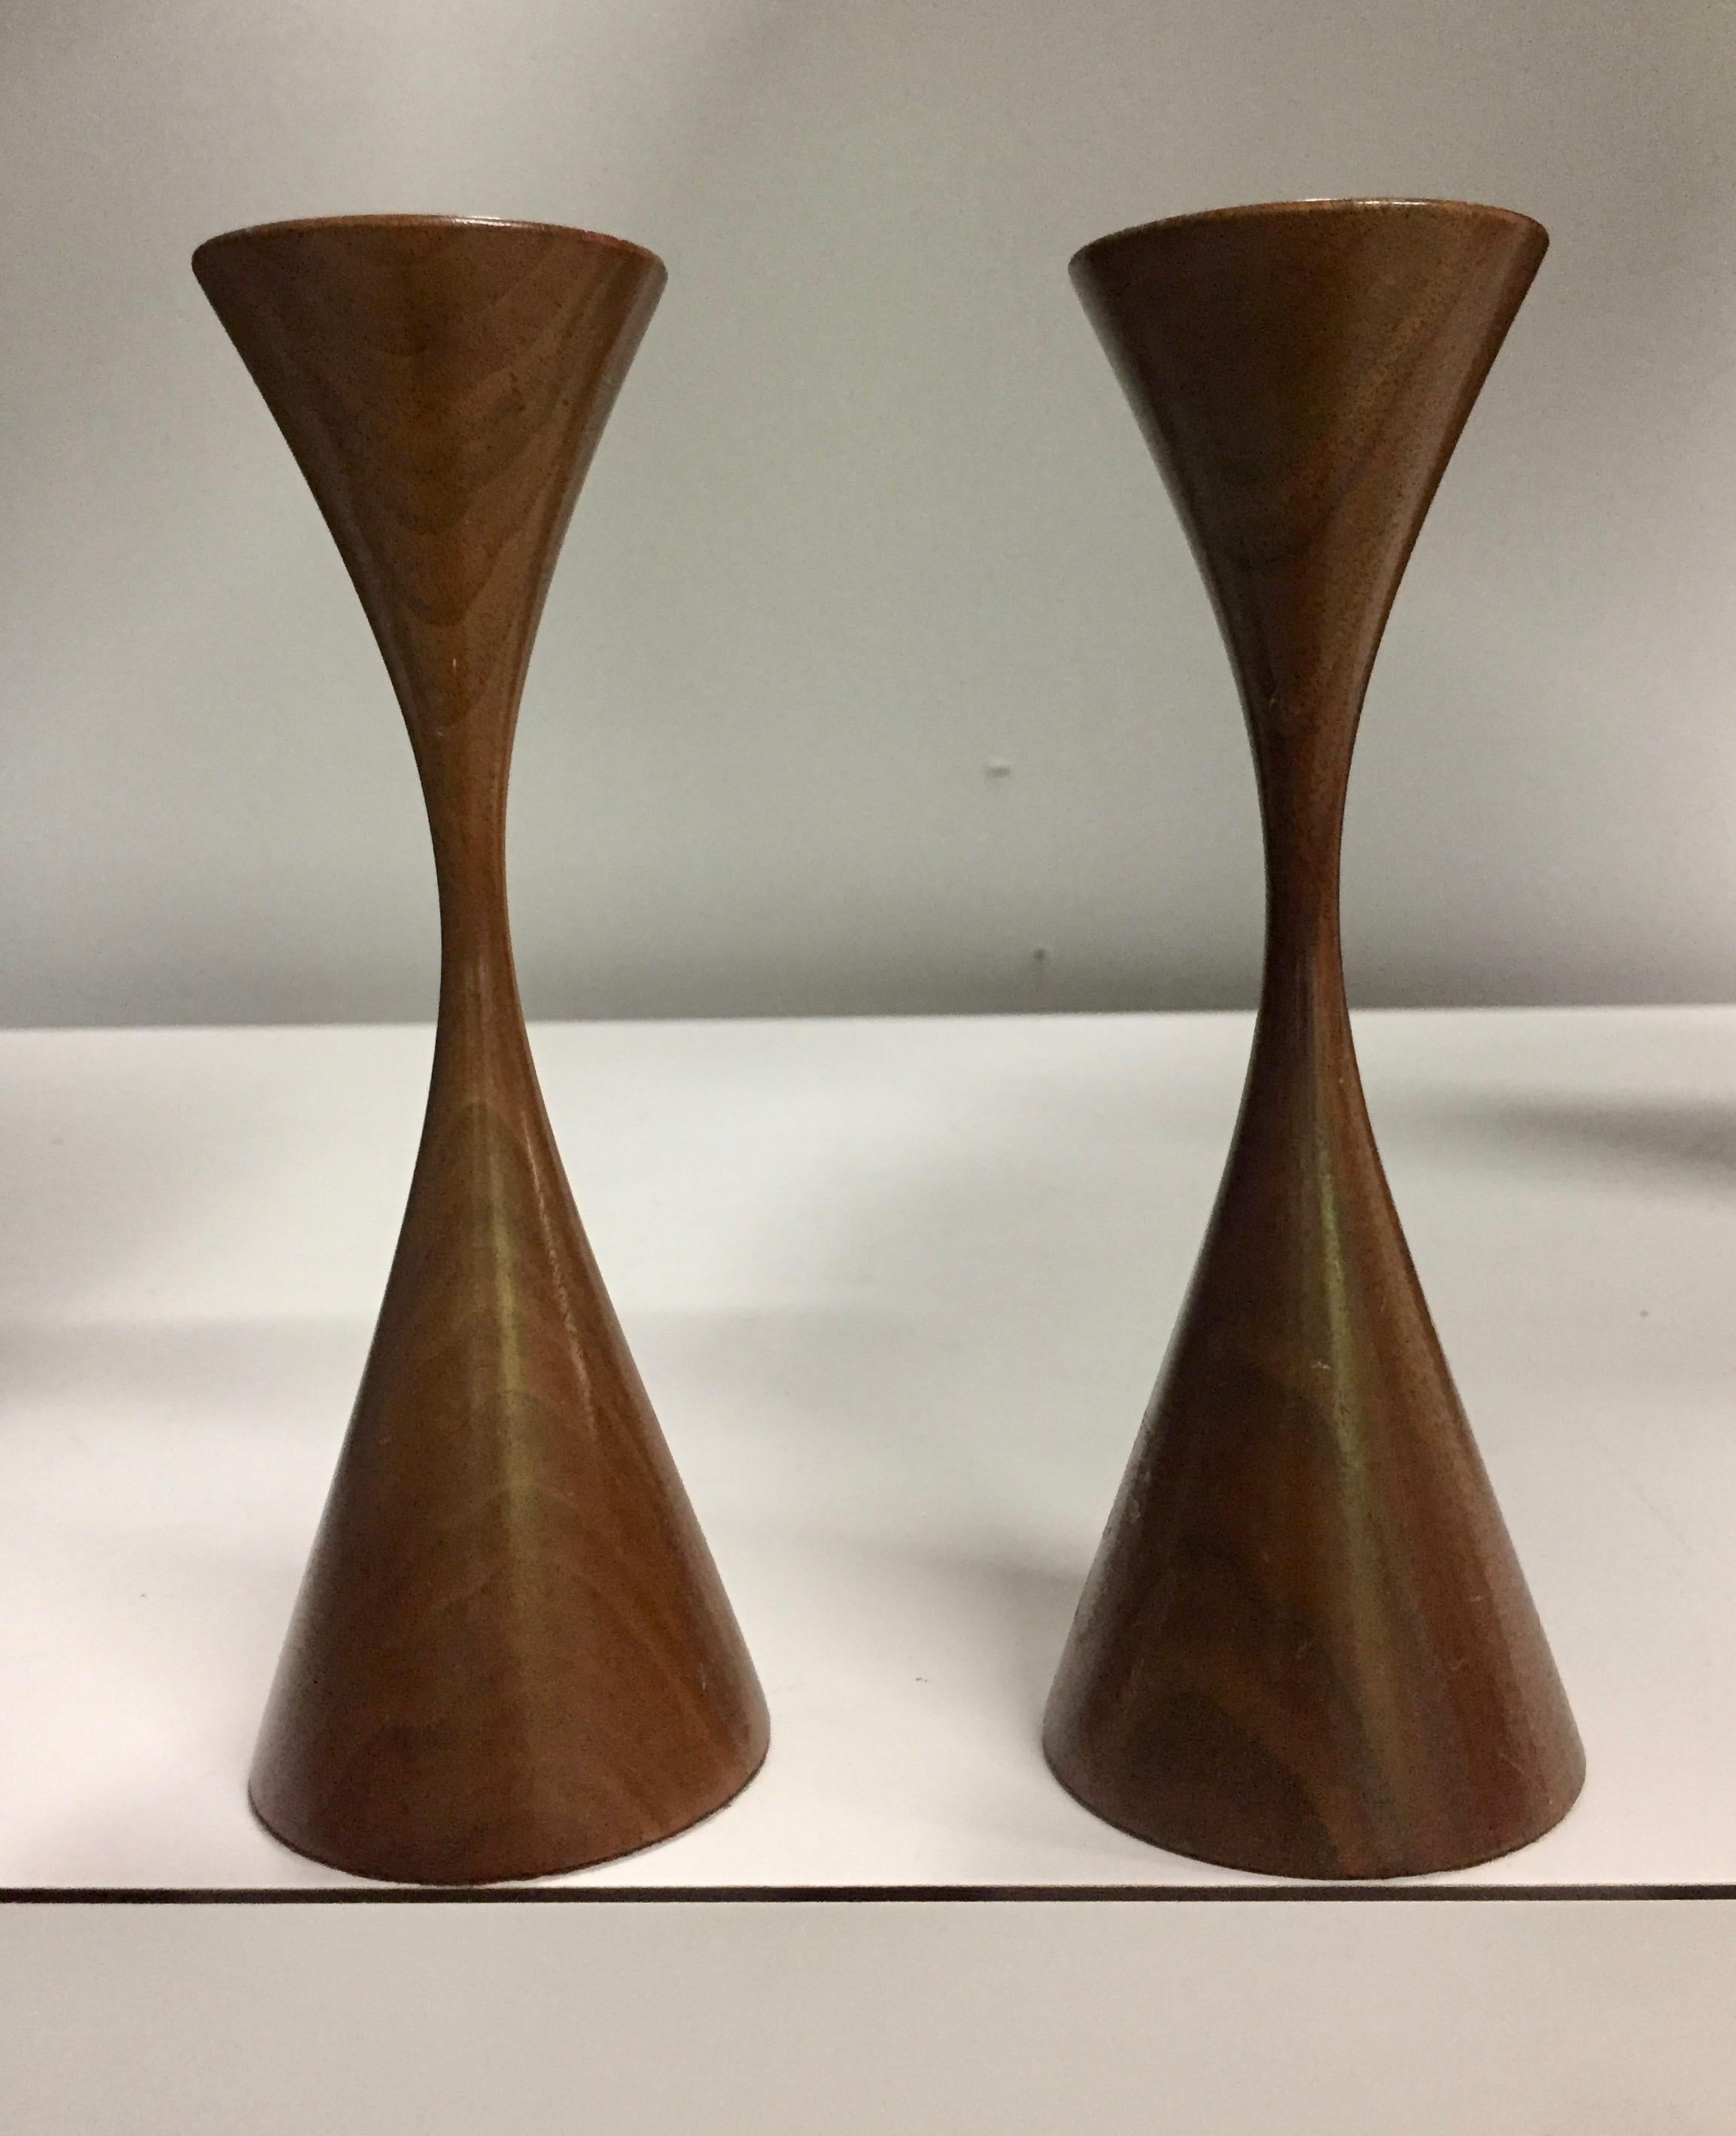 Nice pair of Rude Osolnik turned walnut candlesticks. This design is in the permanent collections of museums around the world. Their distinctive hourglass shape is instantly recognized.